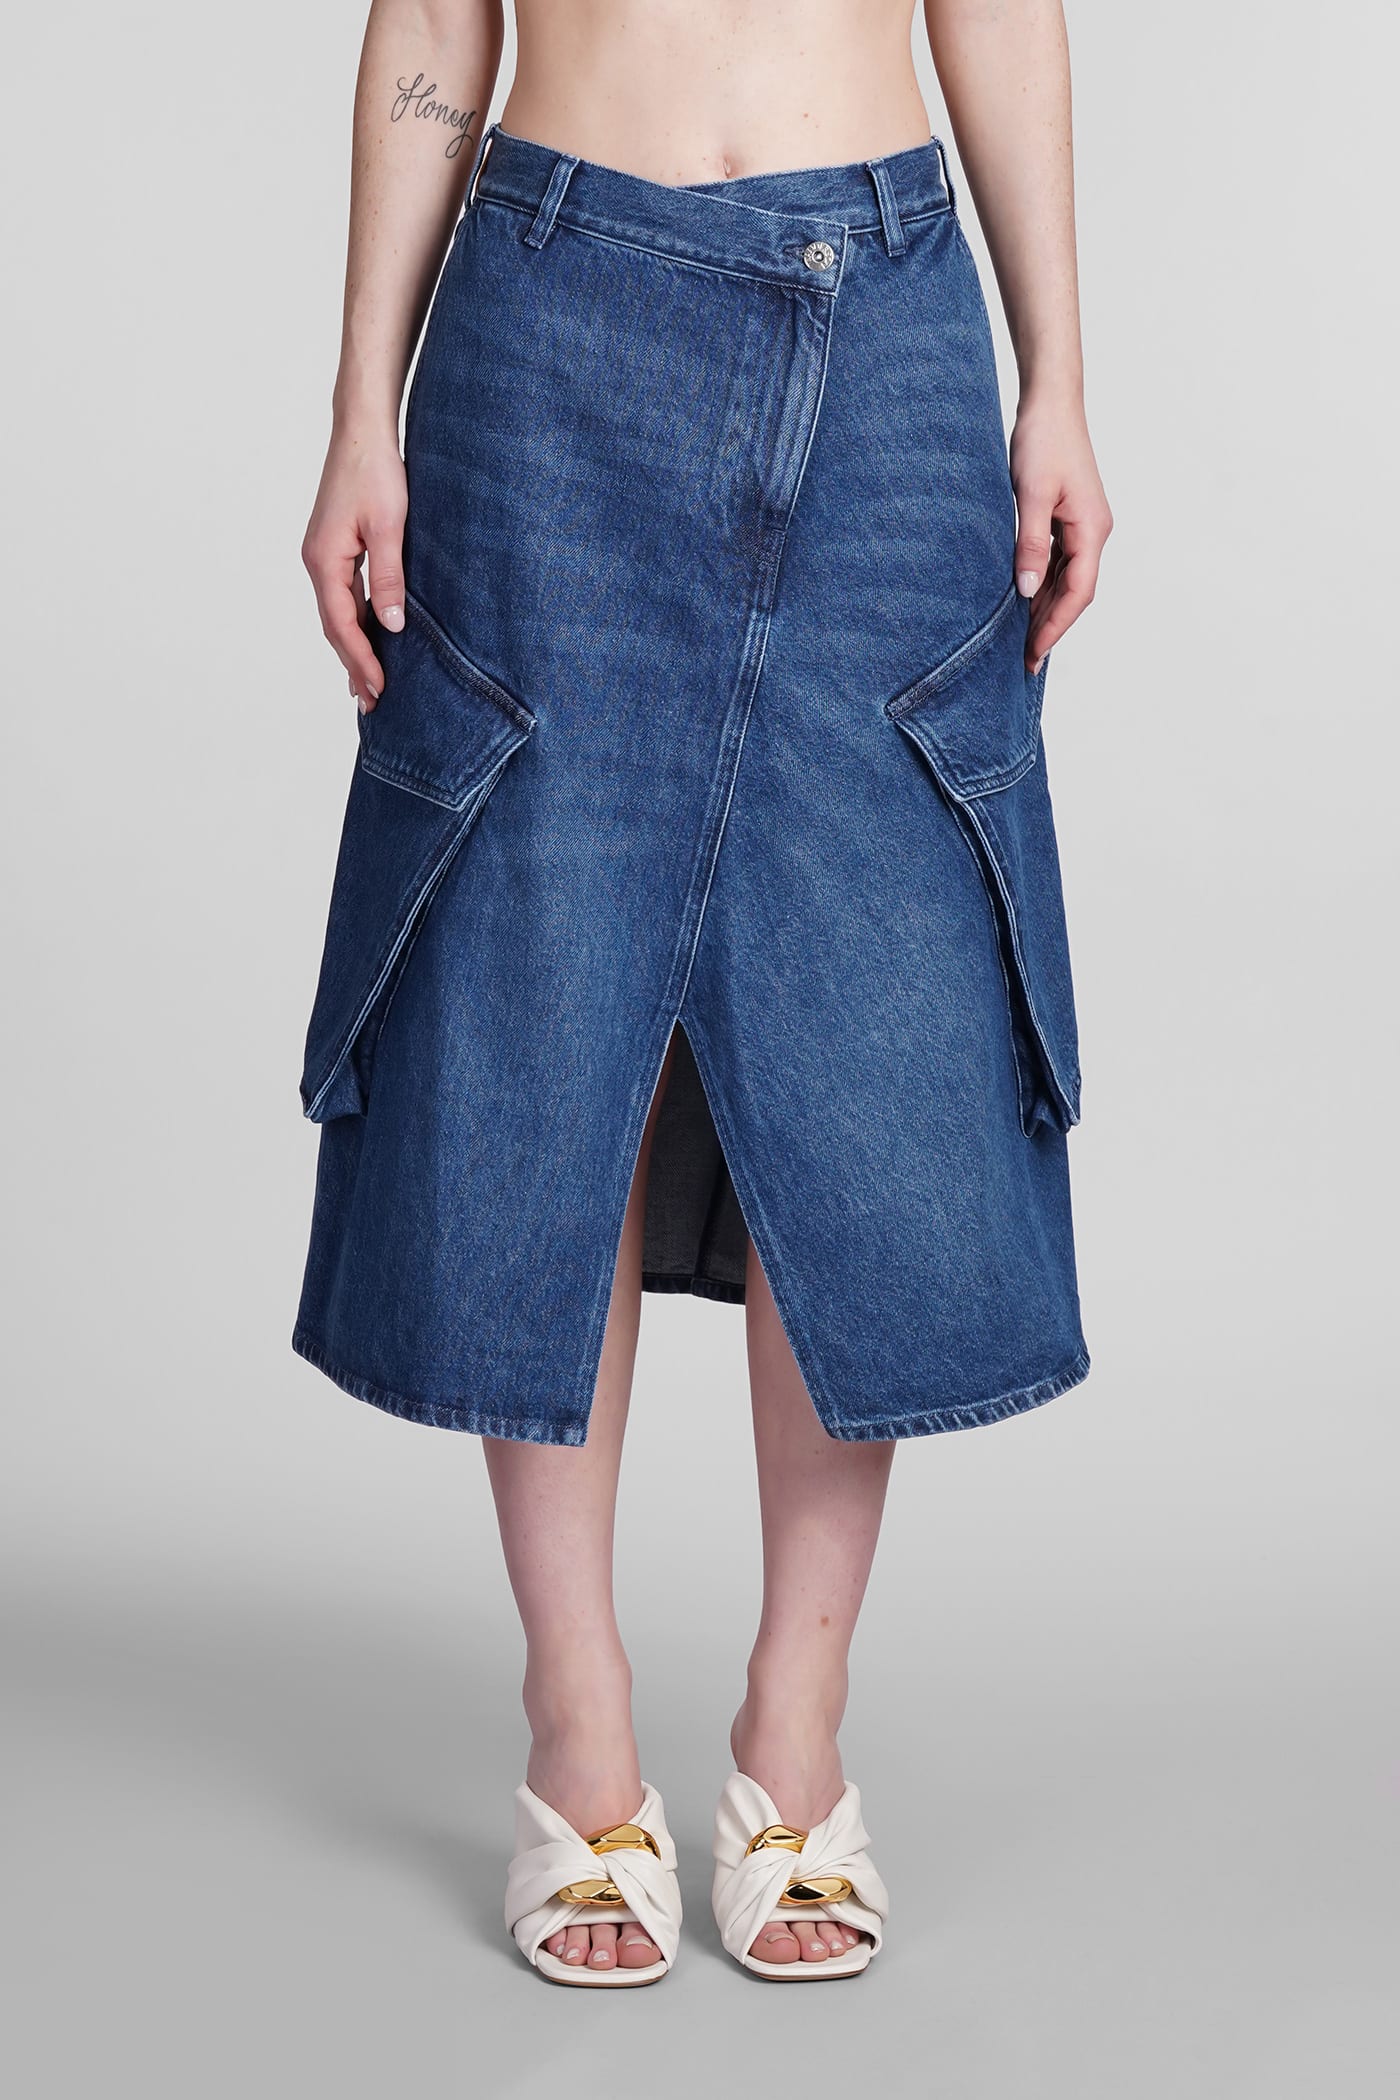 J.W. Anderson Skirt In Blue Cotton